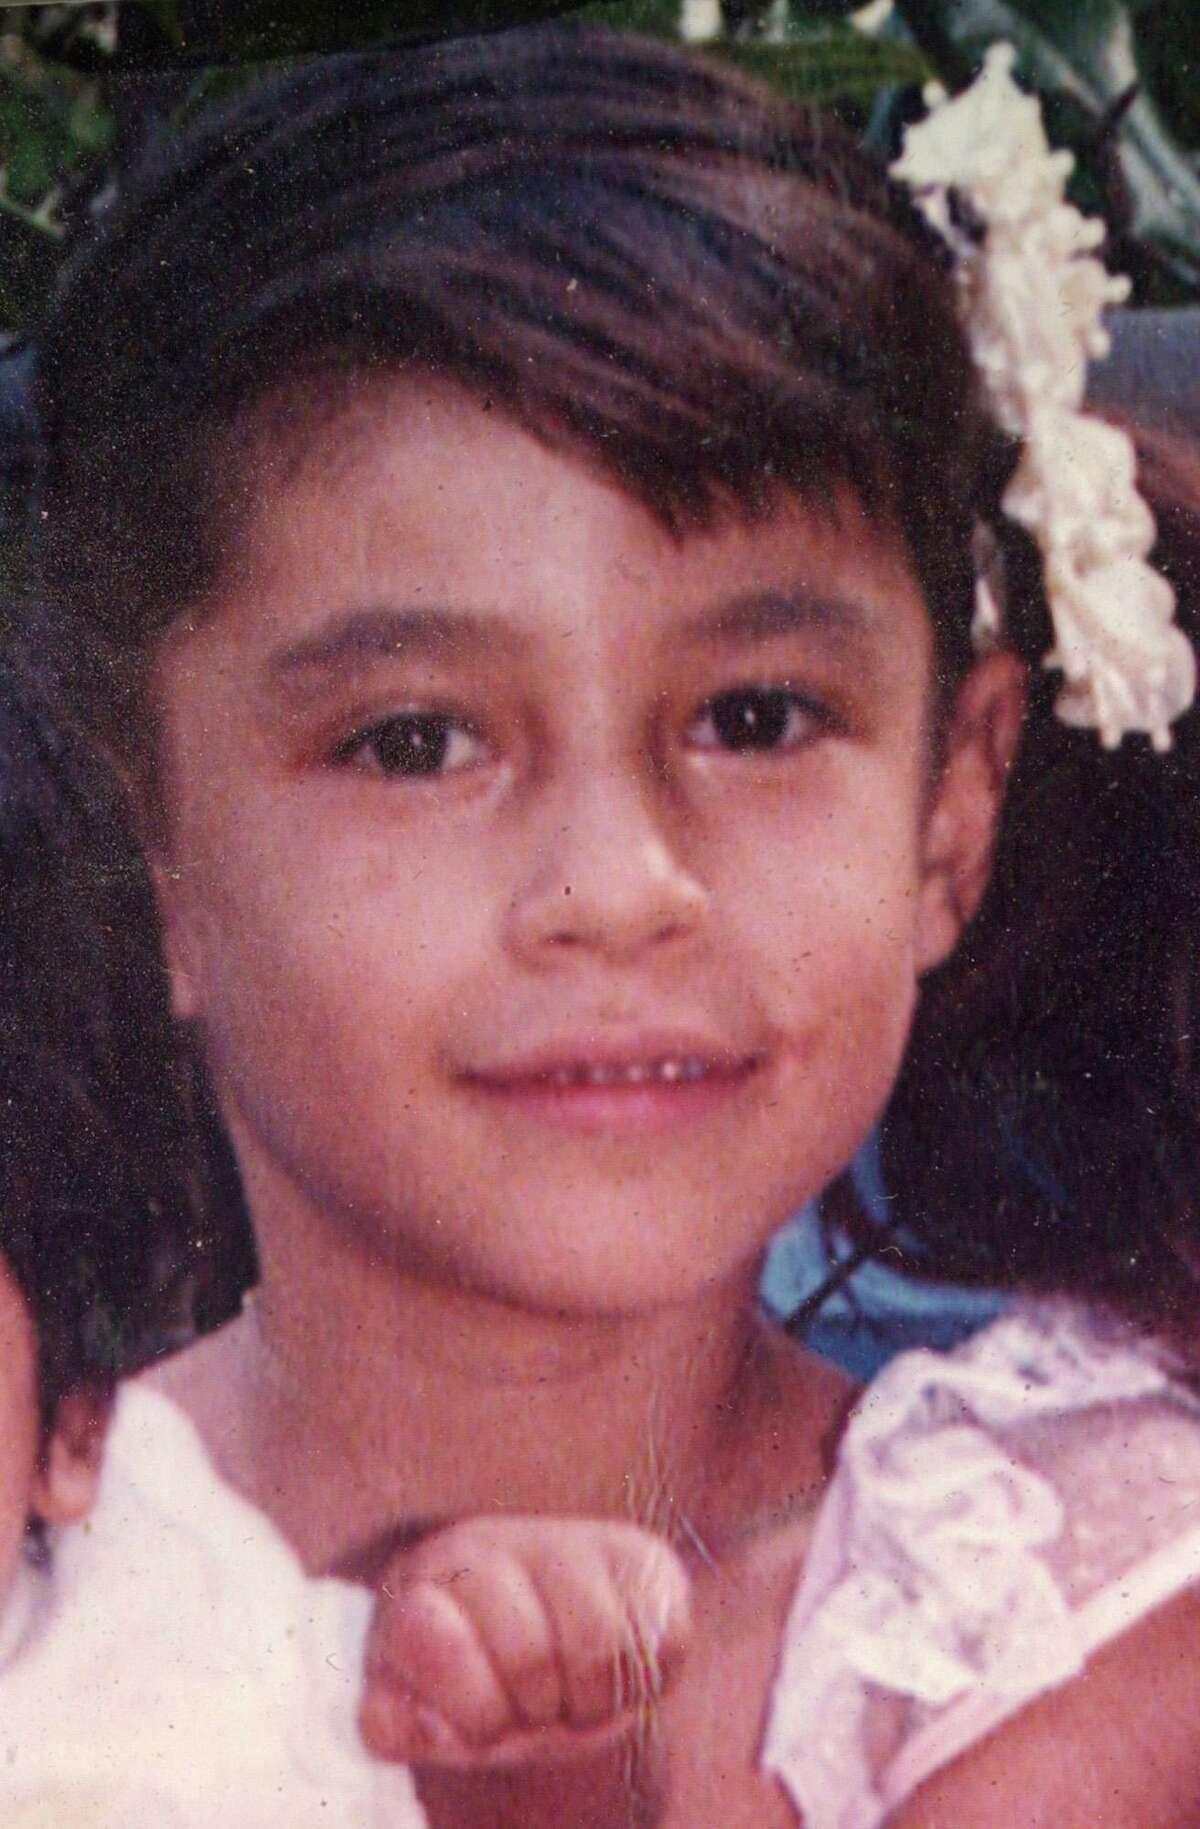 Diana Rebollar was 9 years old in August 1994 when her body was found dumped at a loading dock at a vacant building. She was the third known victim of convicted murderer Anthony Allen Shore, who became known as the Tourniquet Killer.